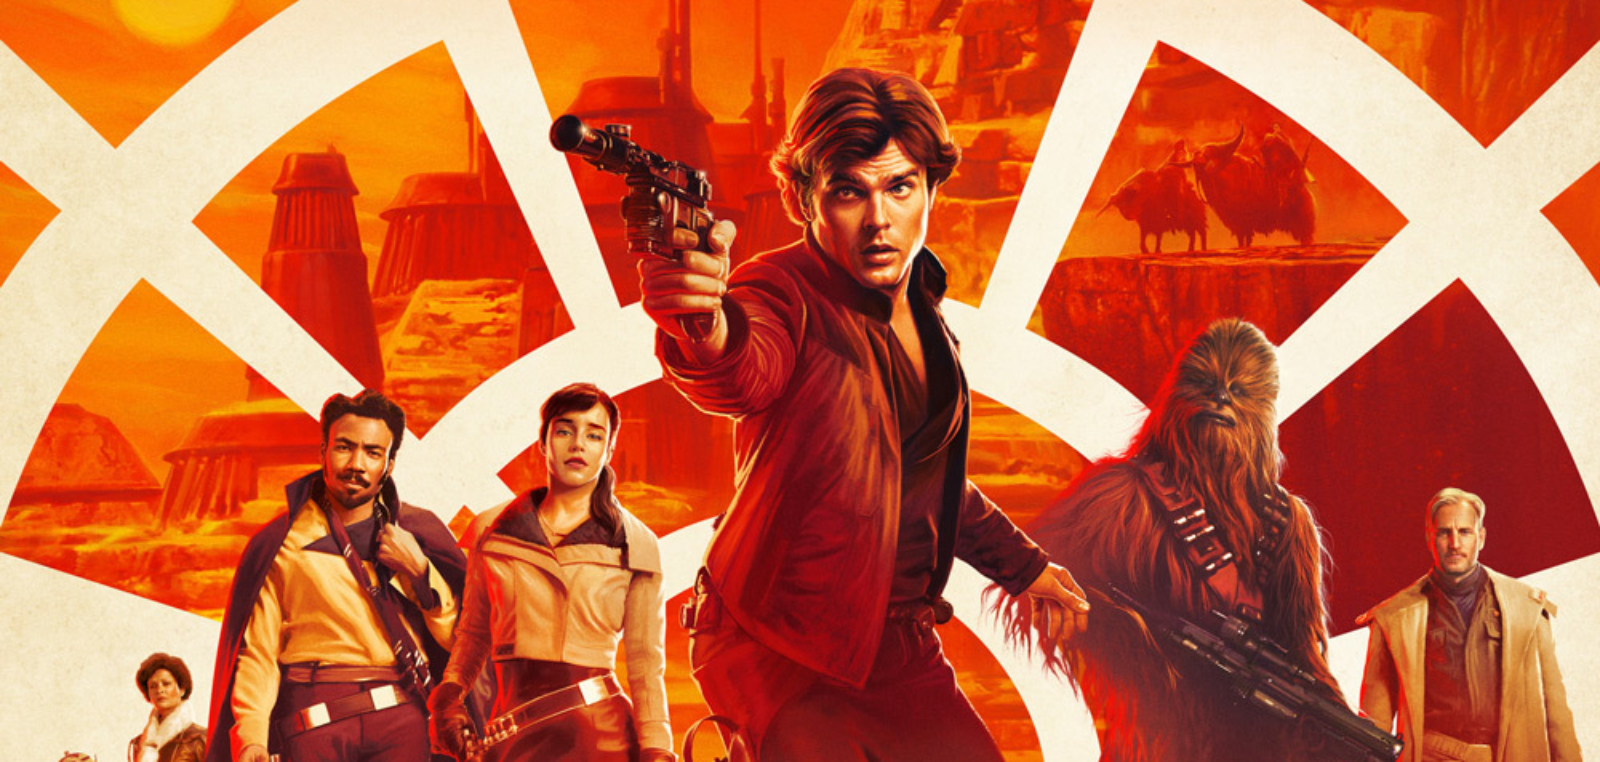 solo-theatrical-poster-1000_27861ab7_1600x762_acf_cropped.jpg (1.11 MB)